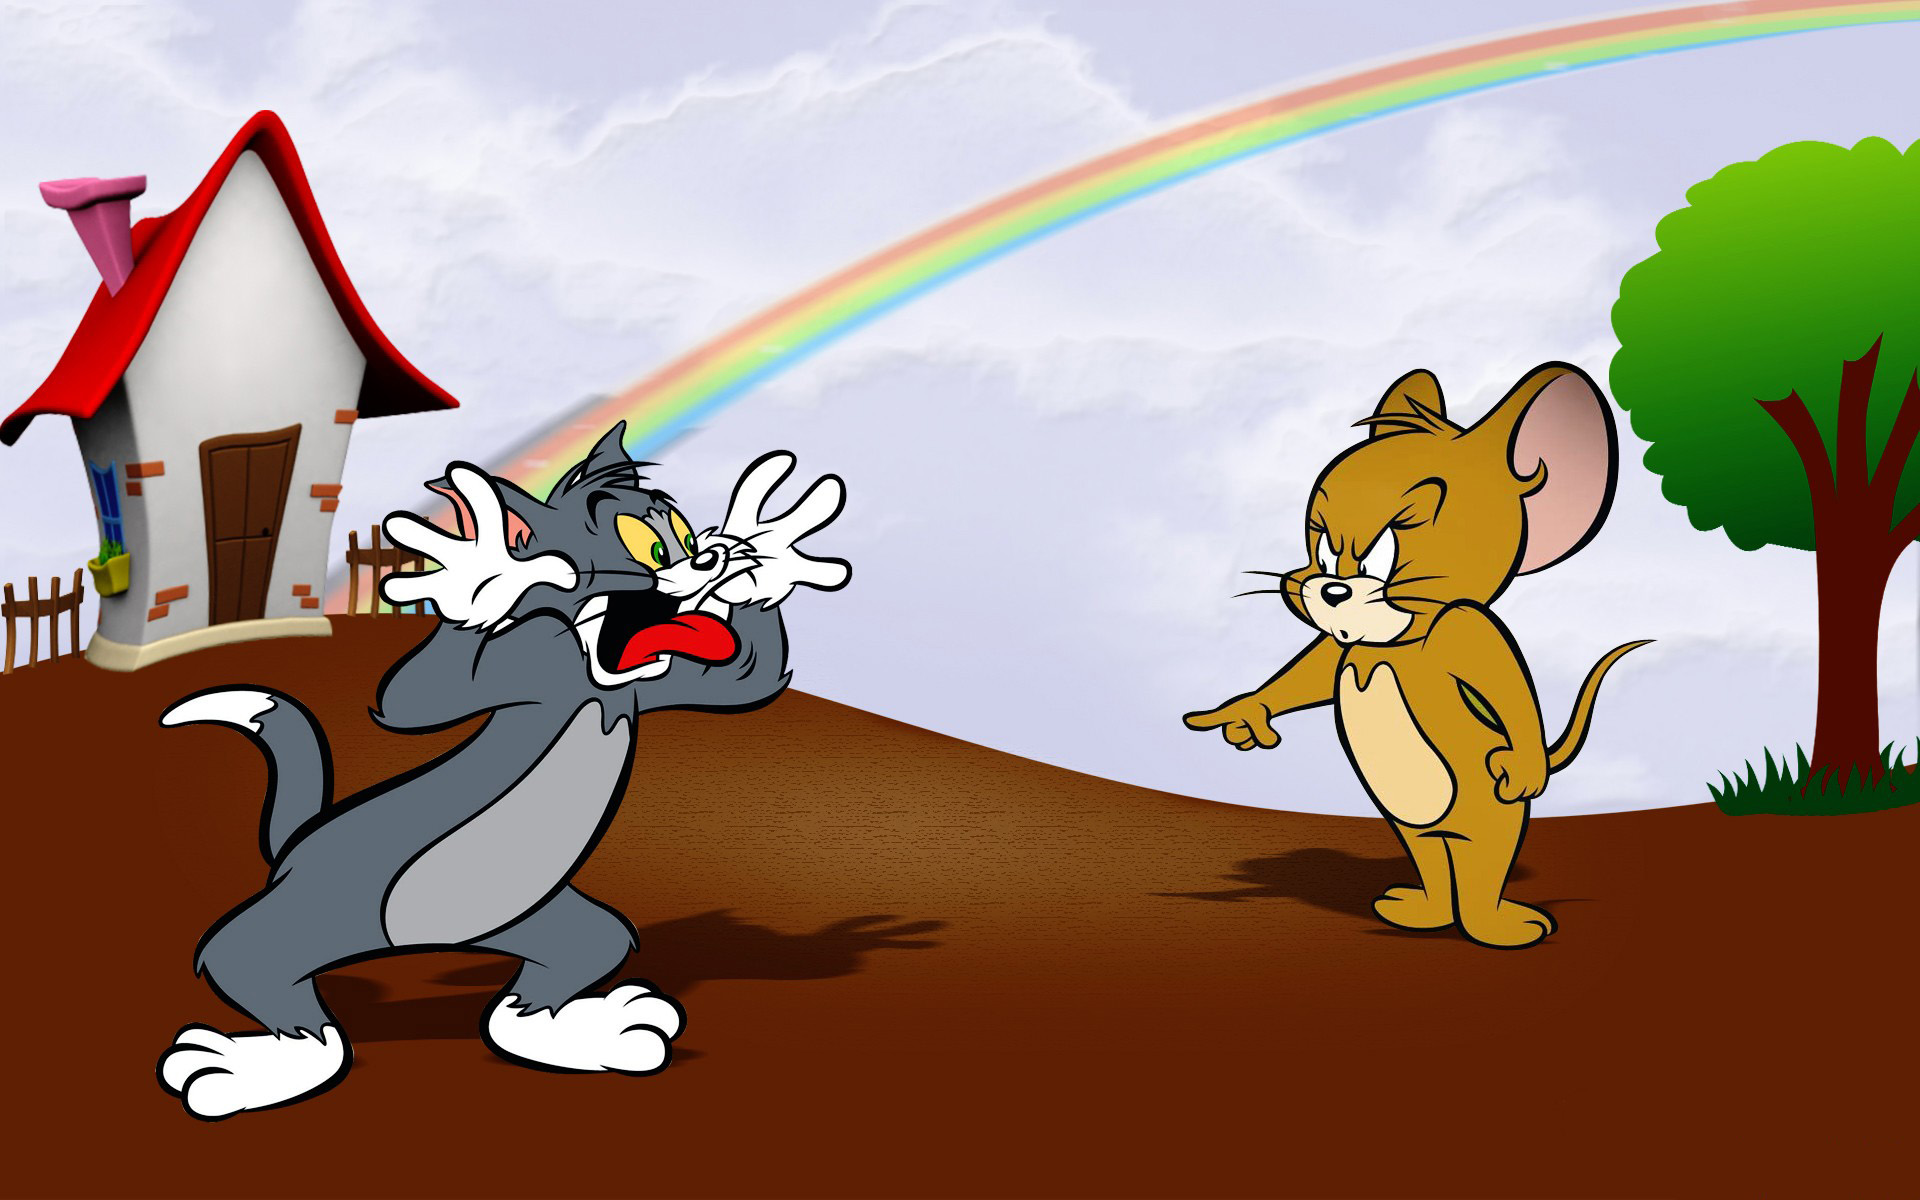 Tom And Jerry Cartoon Movie Hd Wallpaper Images Download 1920x1200 :  